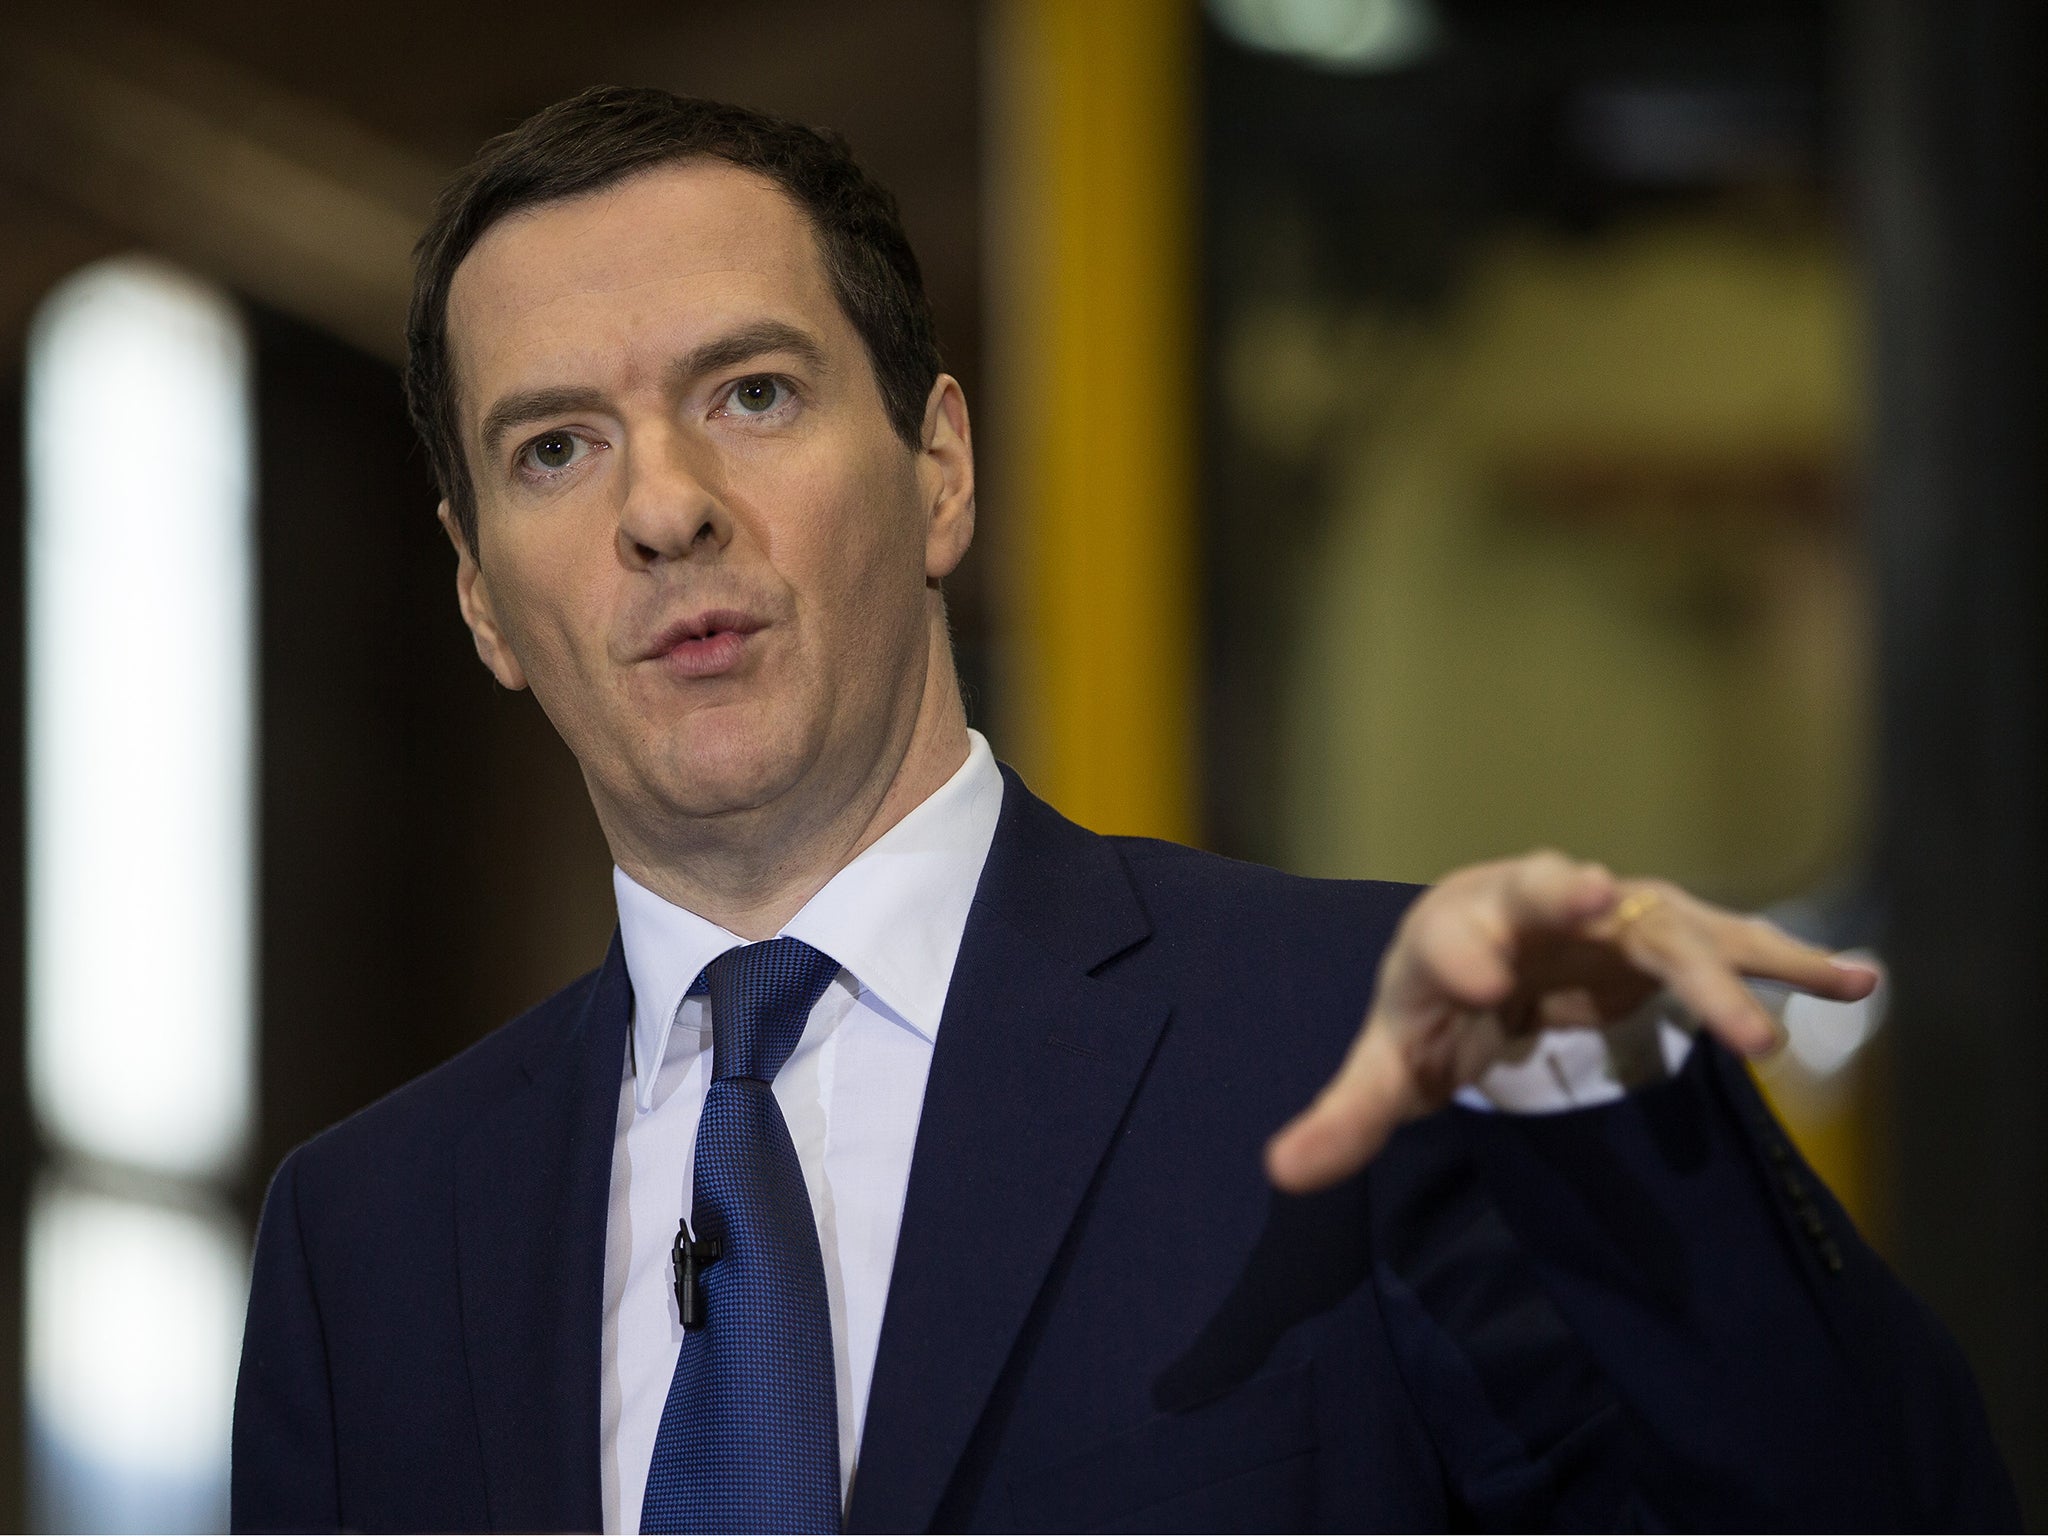 The Daily Telegraph has reported that George Osborne is writing to public sector workers to ask them to fill in an online survey about their money-saving ideas